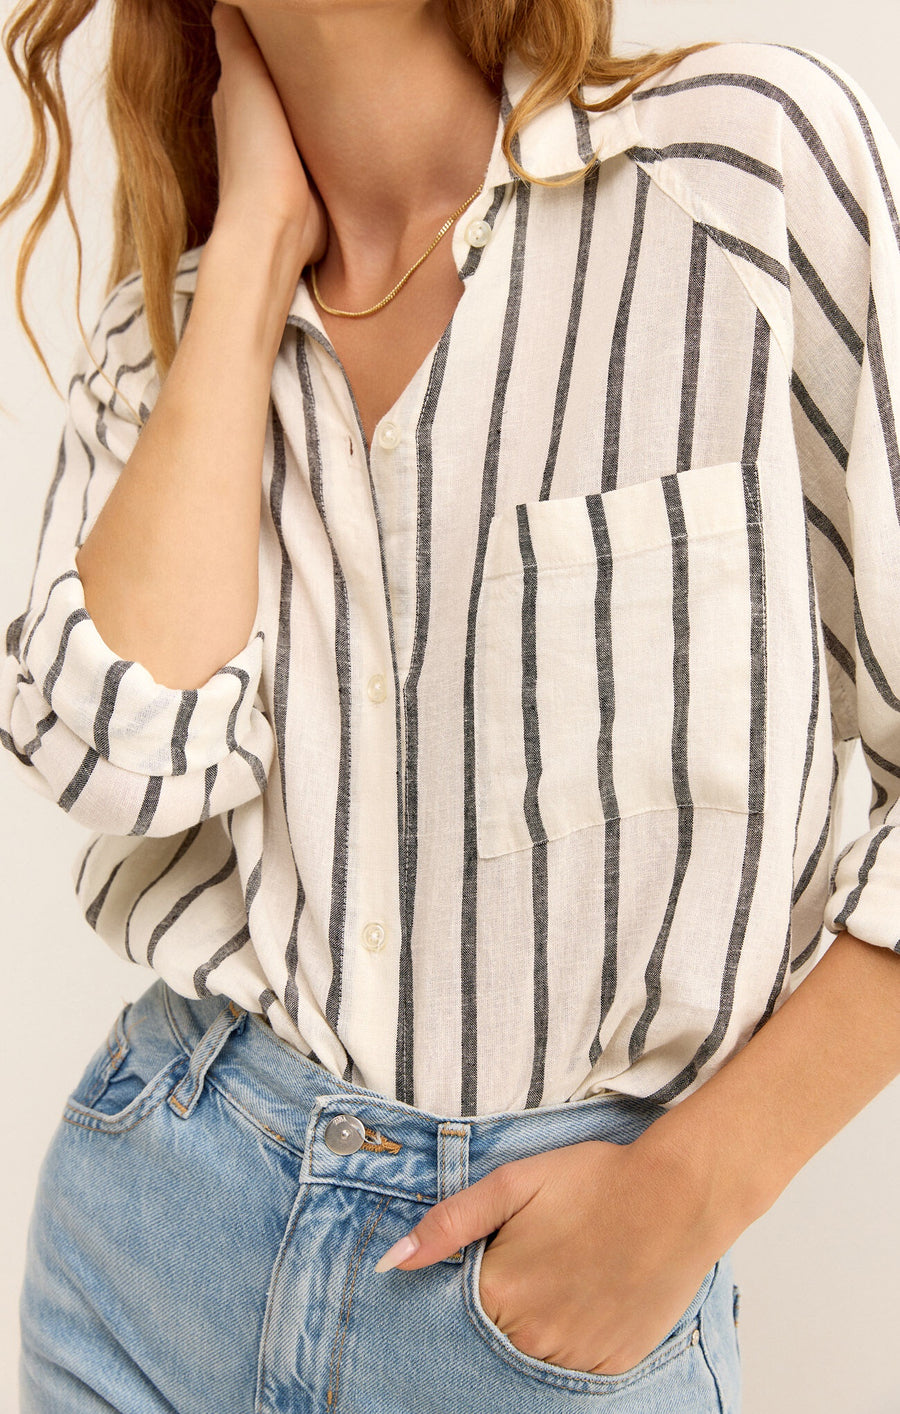 Featuring a striped long sleeve light weight button up with chest pocket detail in black and white stripe